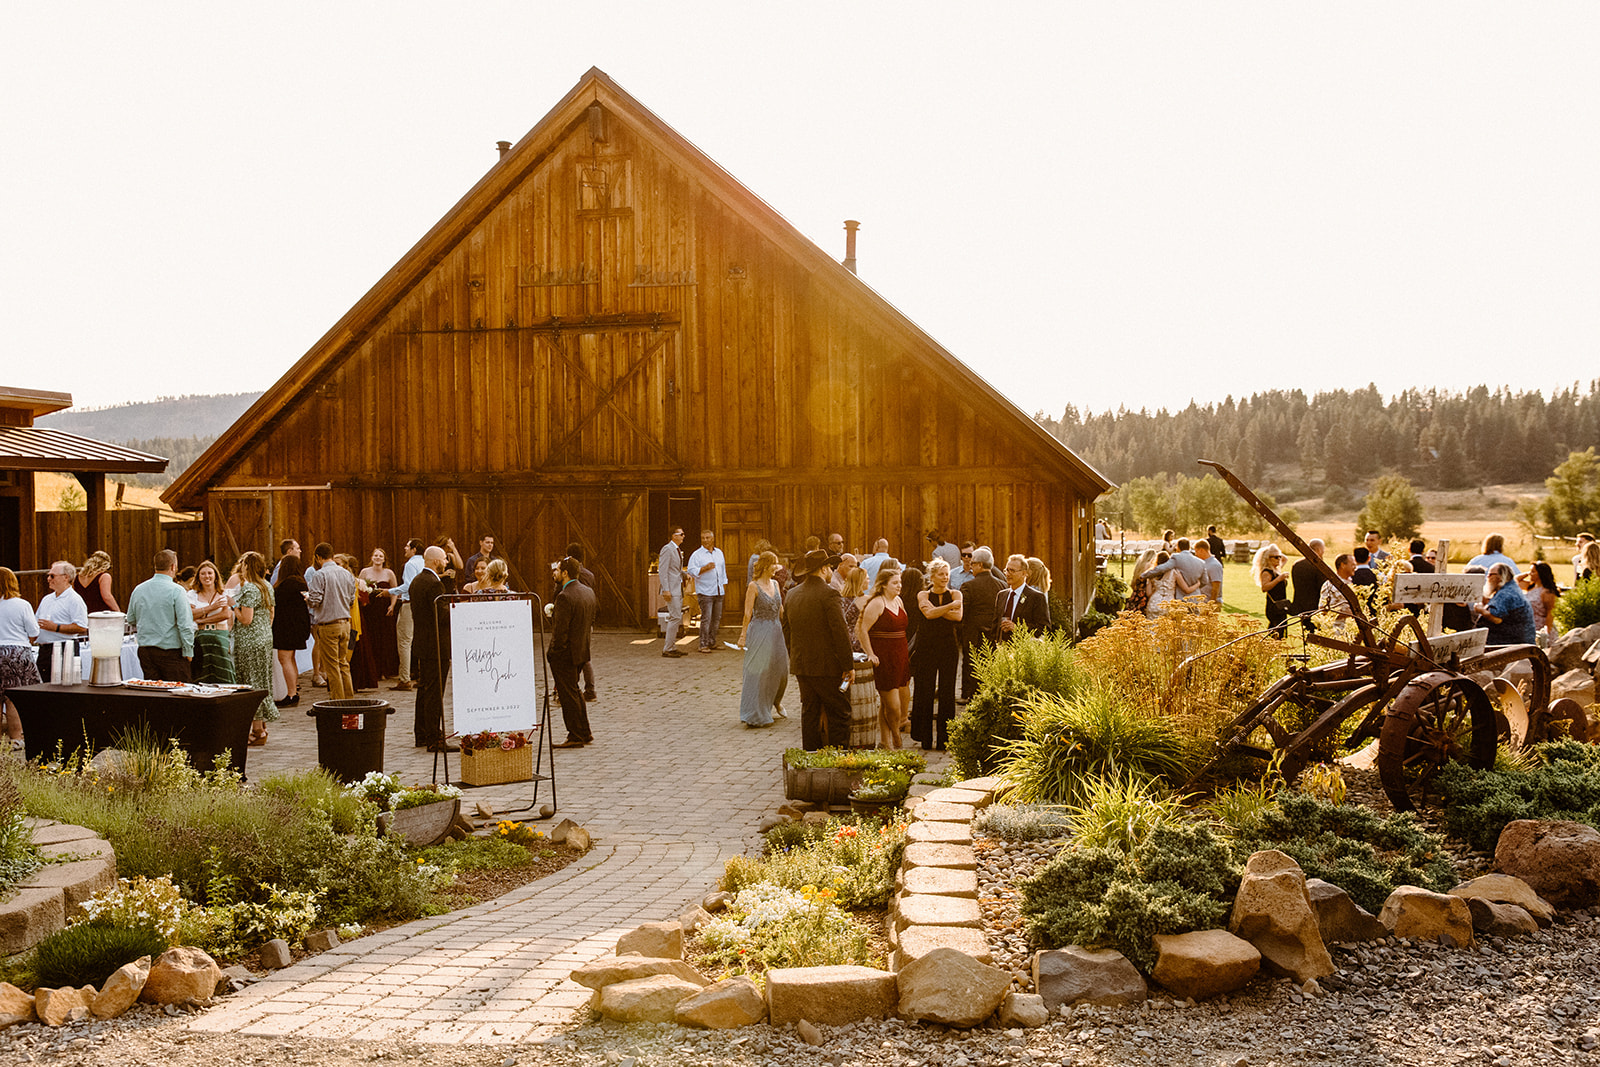 Outdoor Wedding Day with golden hour photos captured by PNW Wedding Photographer